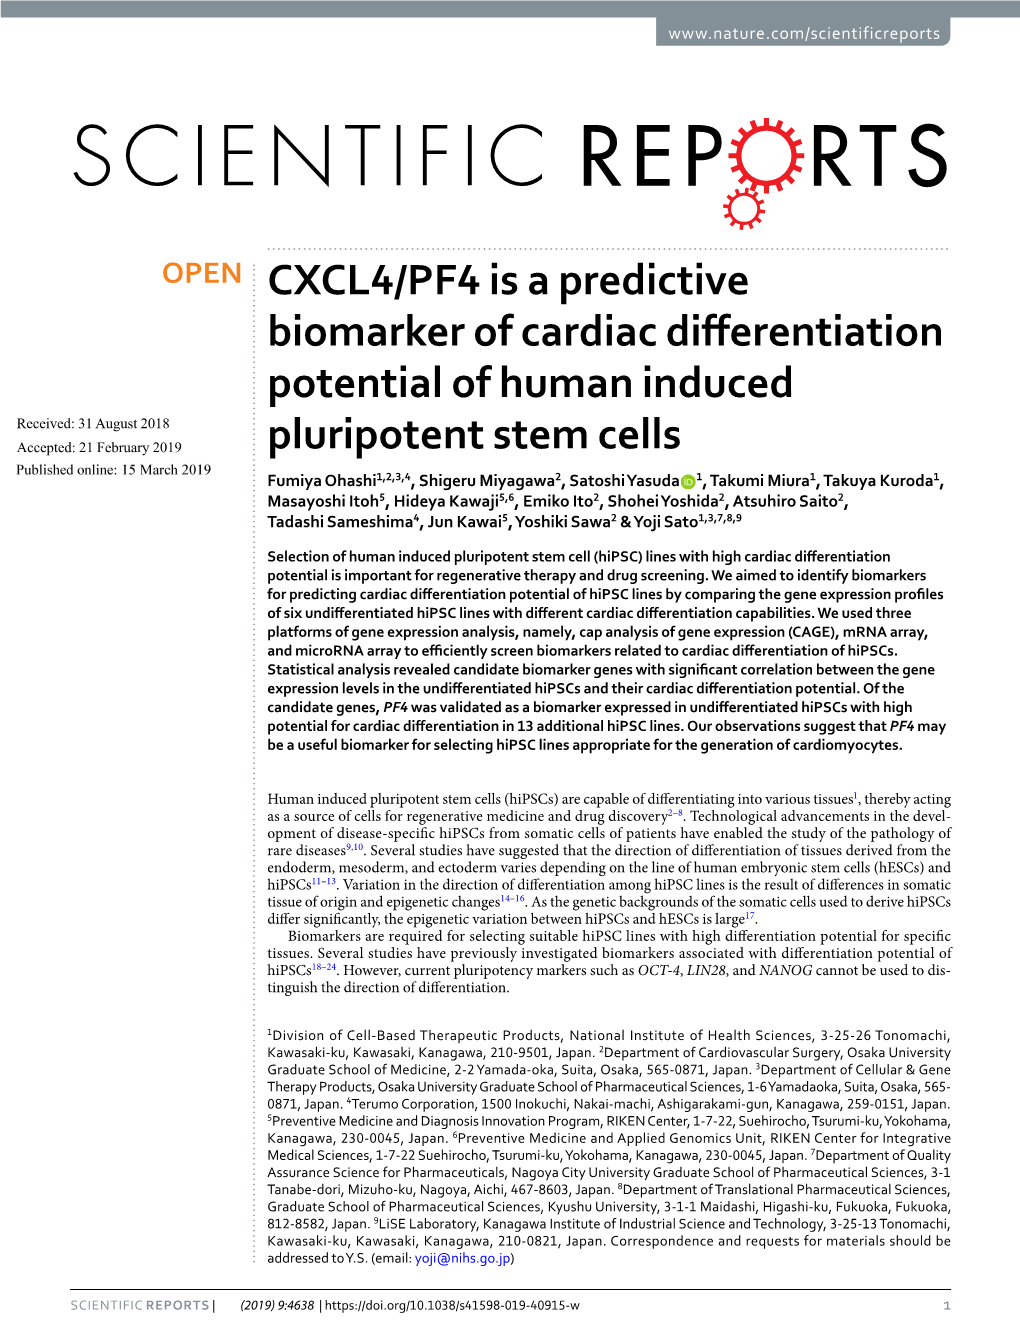 CXCL4/PF4 Is a Predictive Biomarker of Cardiac Differentiation